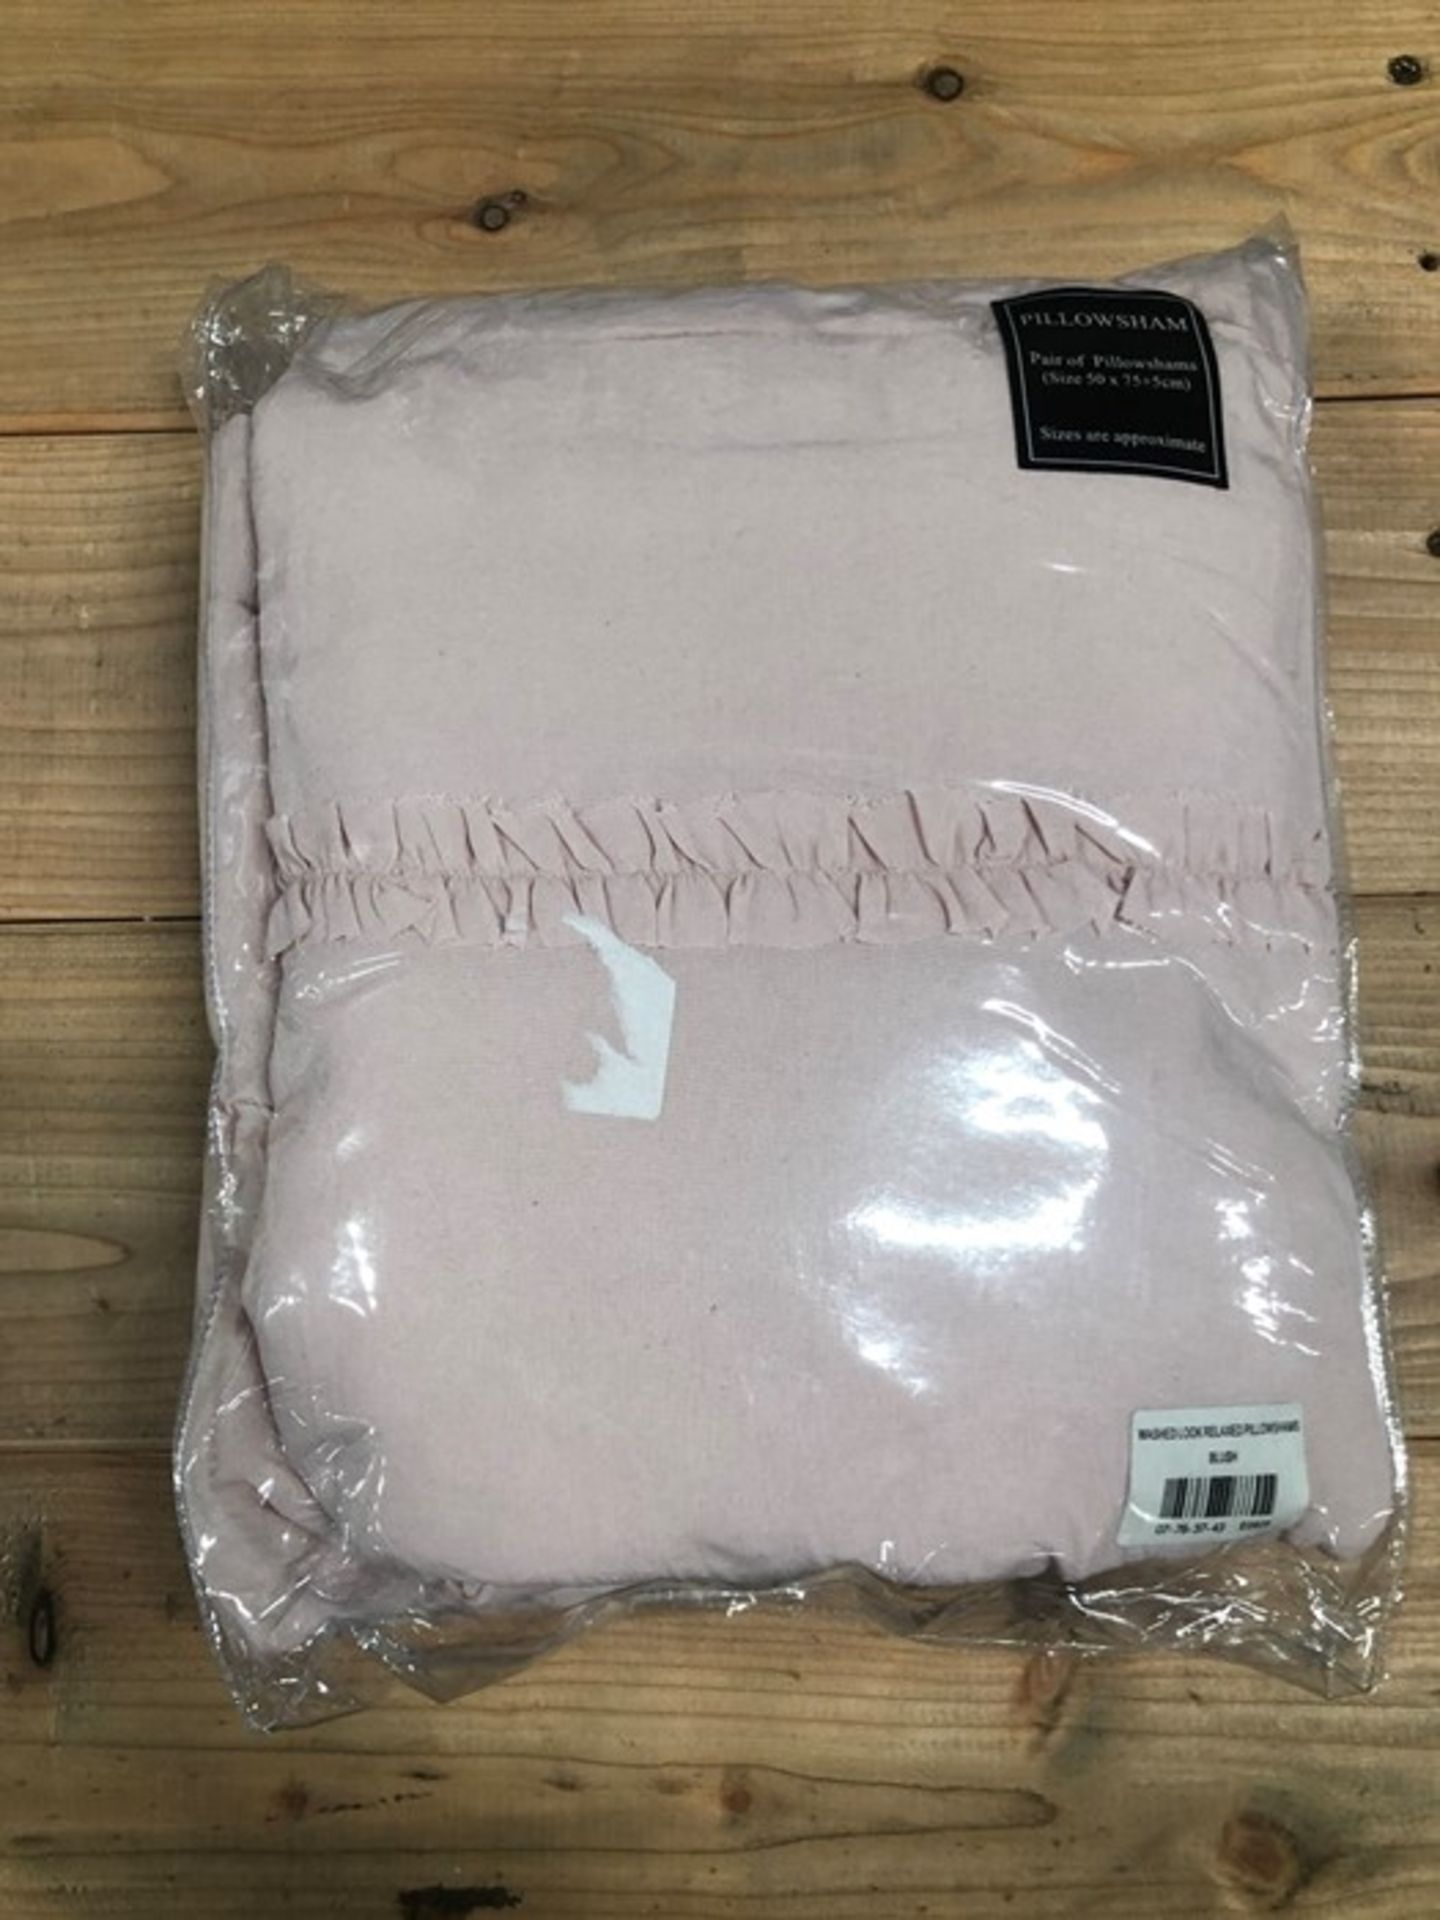 1 BAGGED WASHED LOOK RELAXED PAIR OF PILLOWSHAMS IN BLUSH PINK / RRP £19.99 (PUBLIC VIEWING